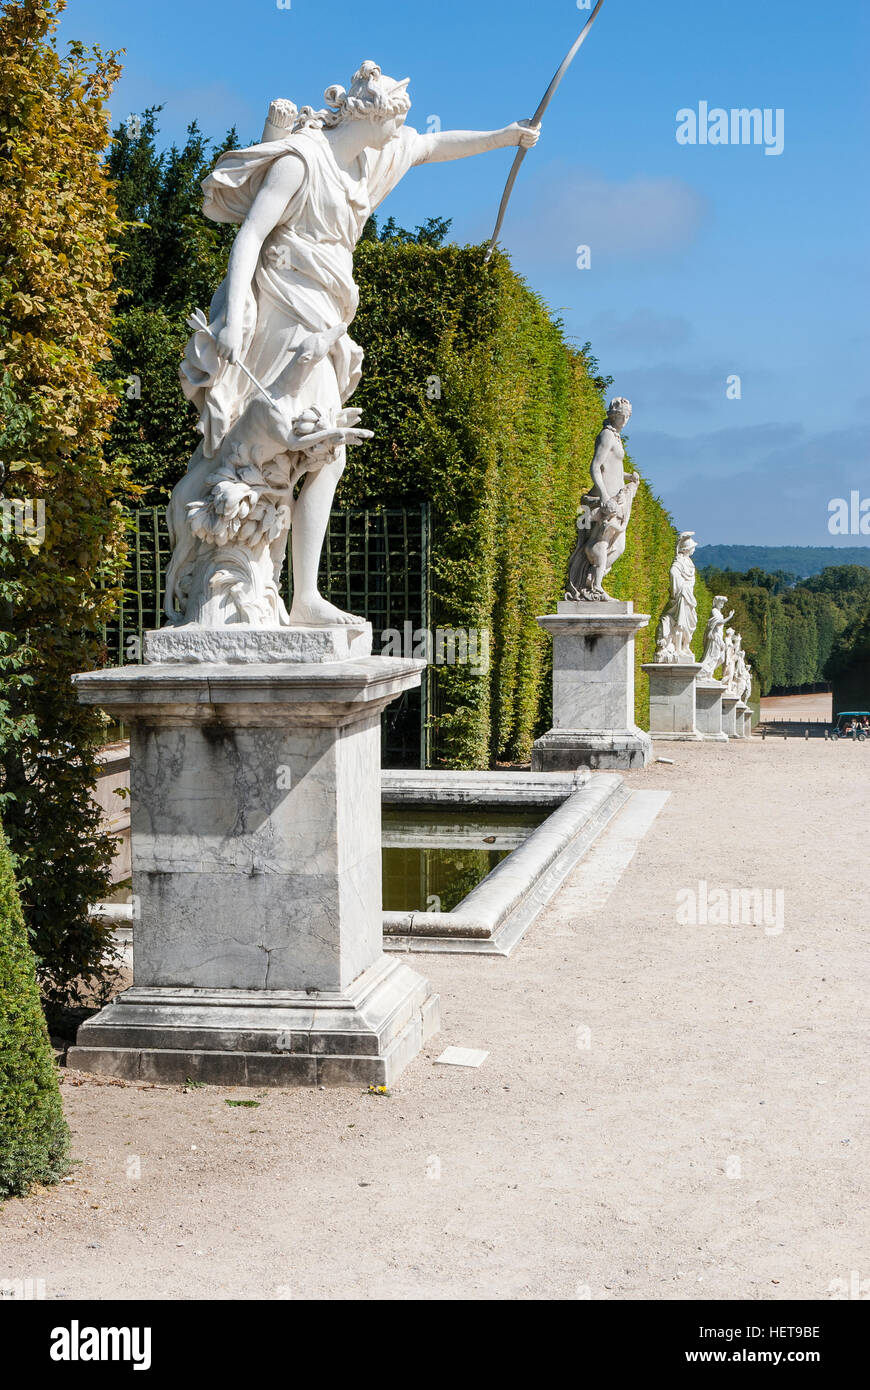 Statues in the Garden at the Palace of Versailles Stock Photo - Alamy